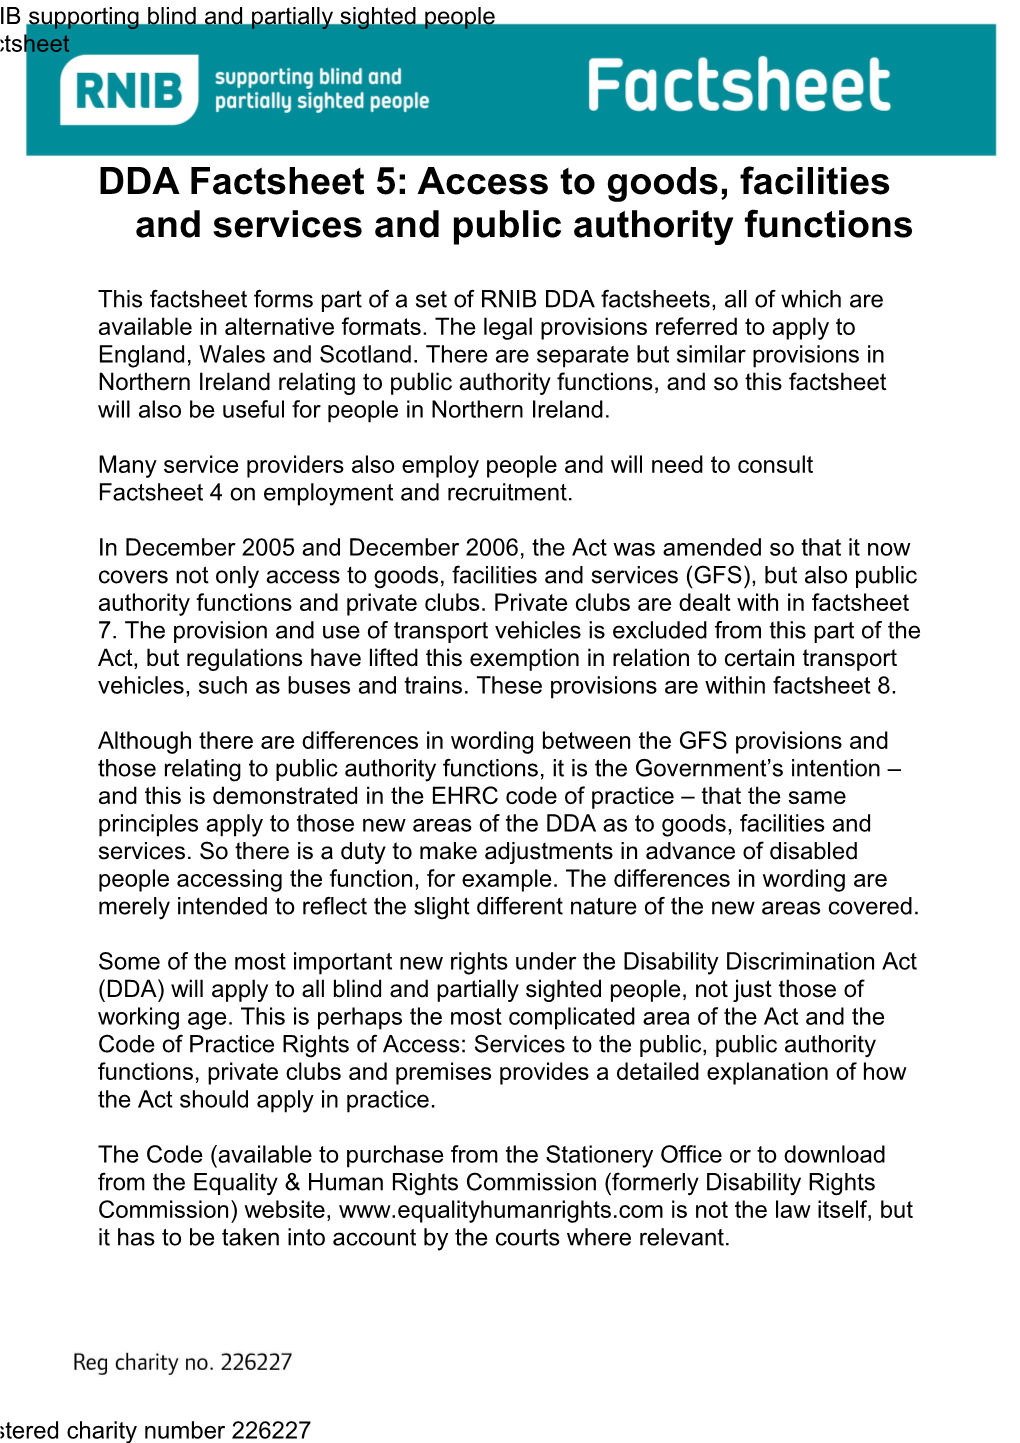 DDA Factsheet 5: Access to Goods, Facilities and Services and Public Authority Functions